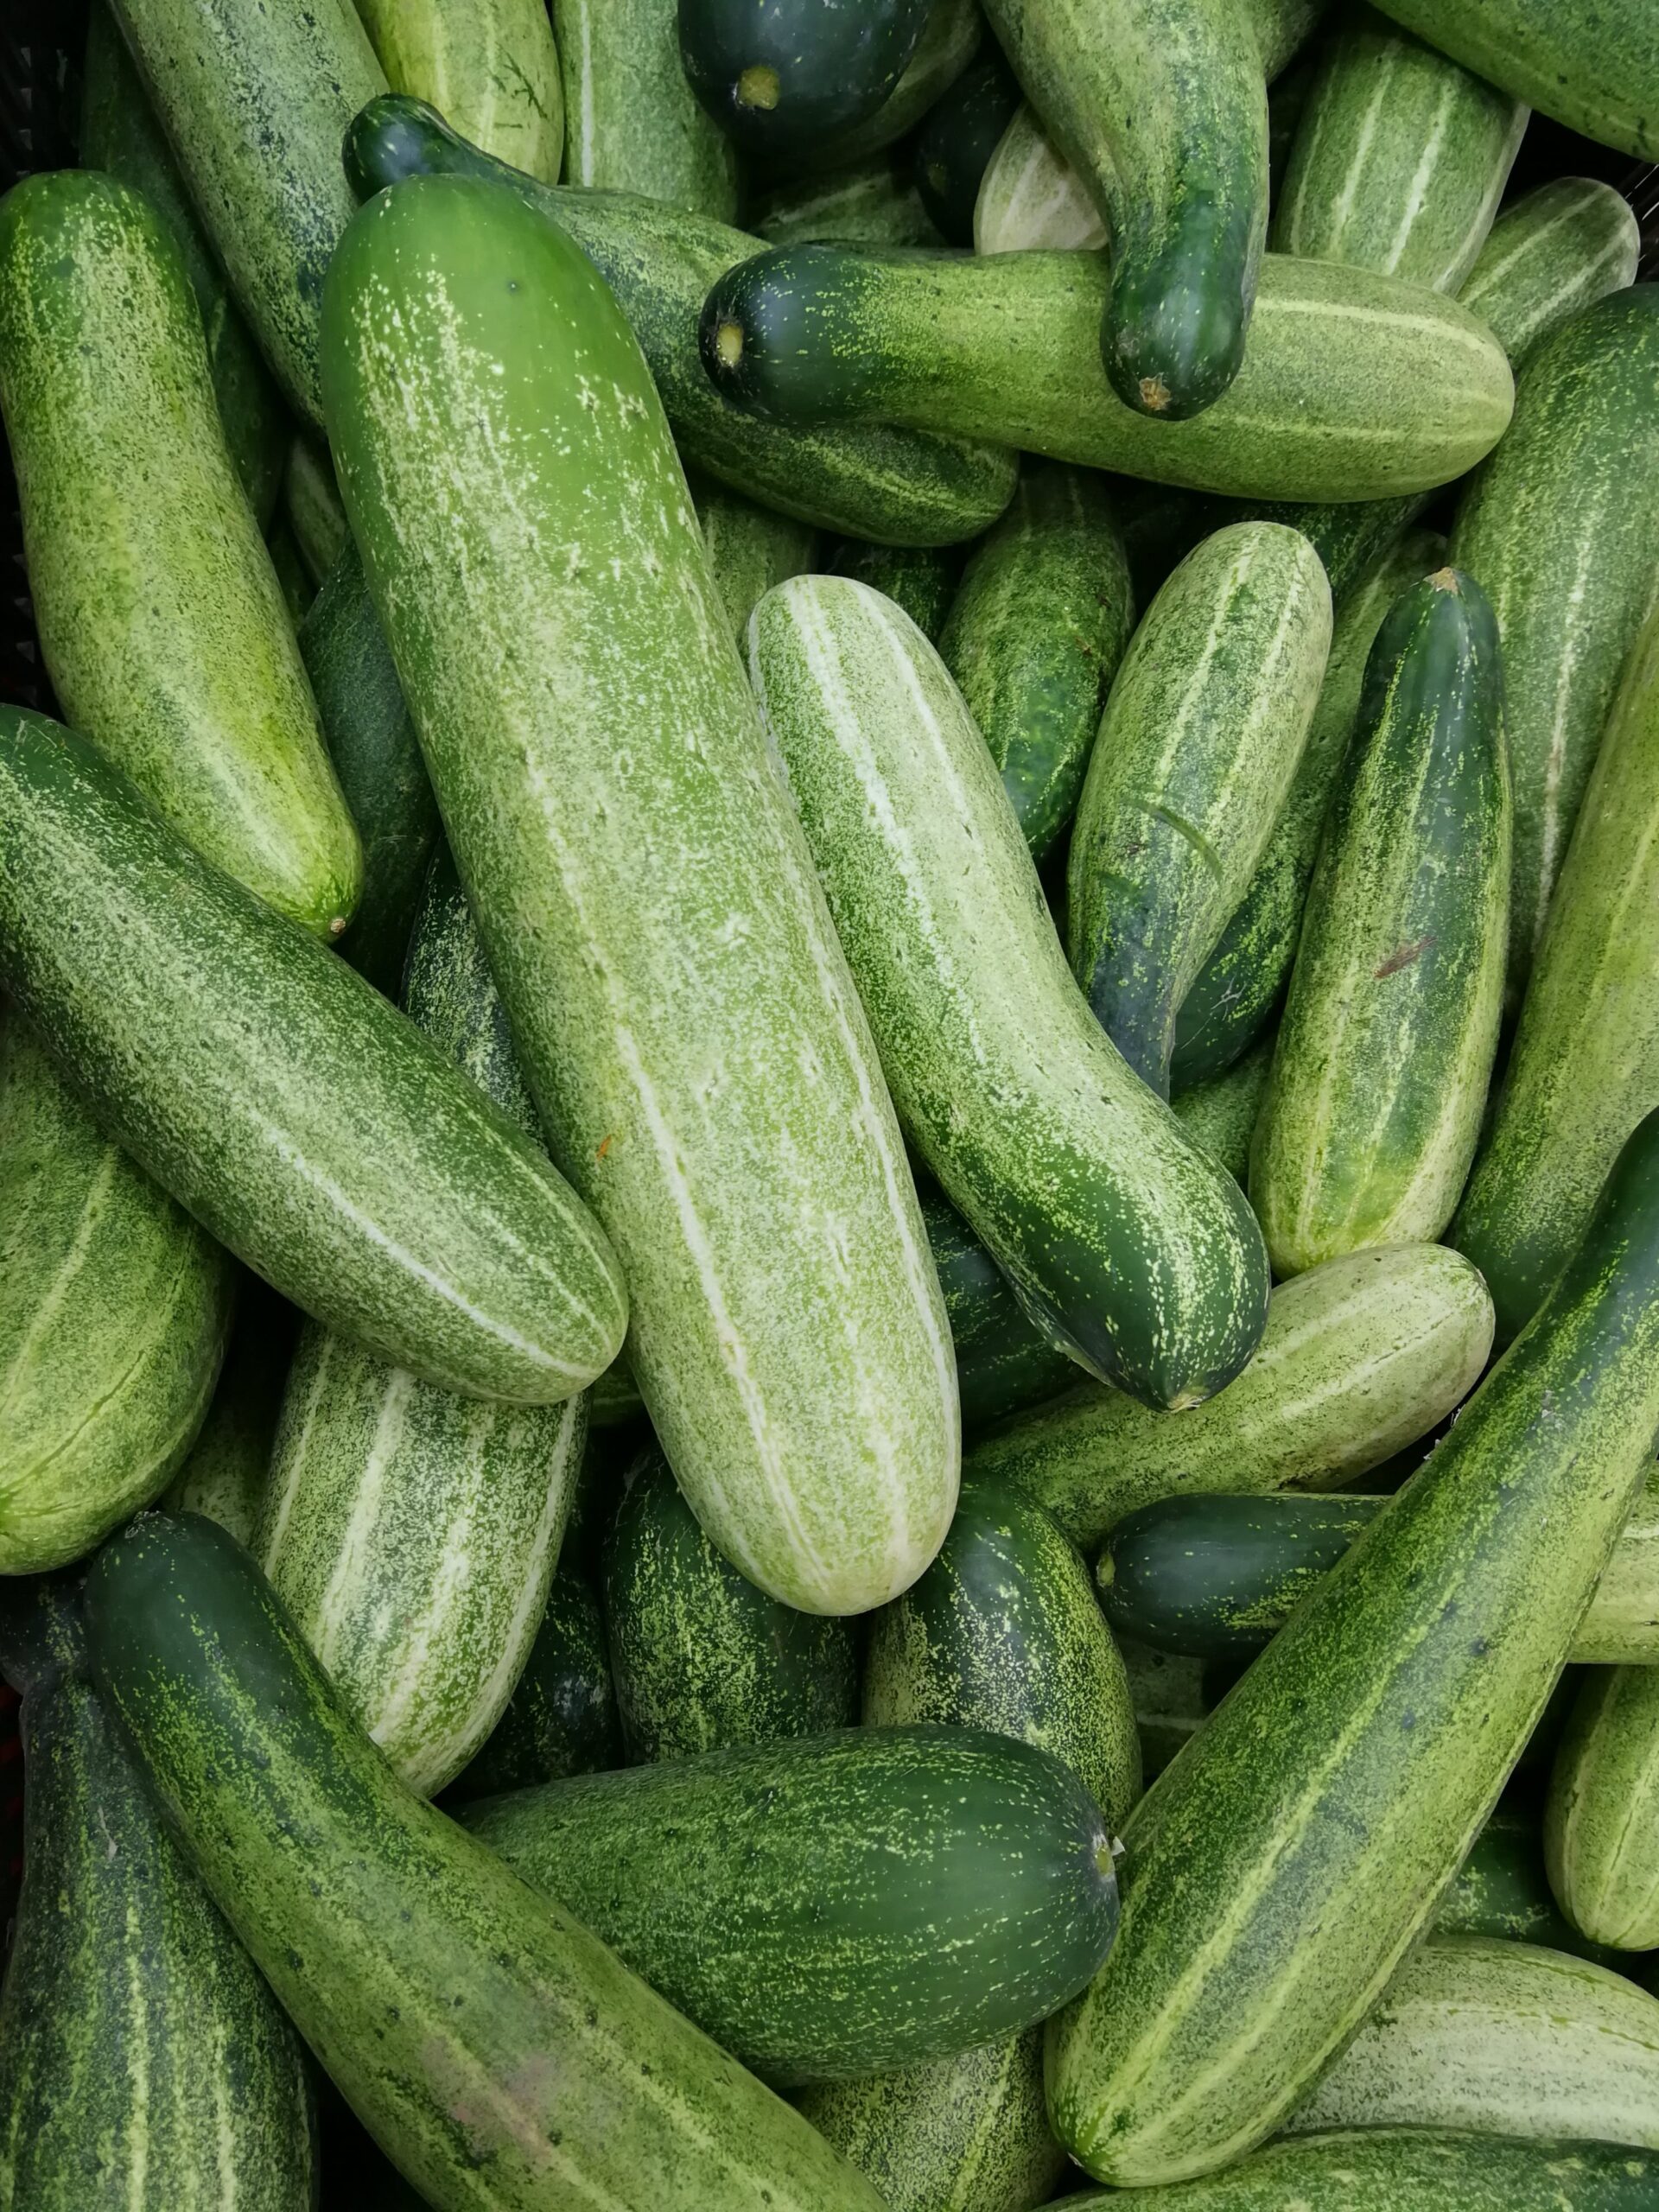 Weight Equivalents Cucumber